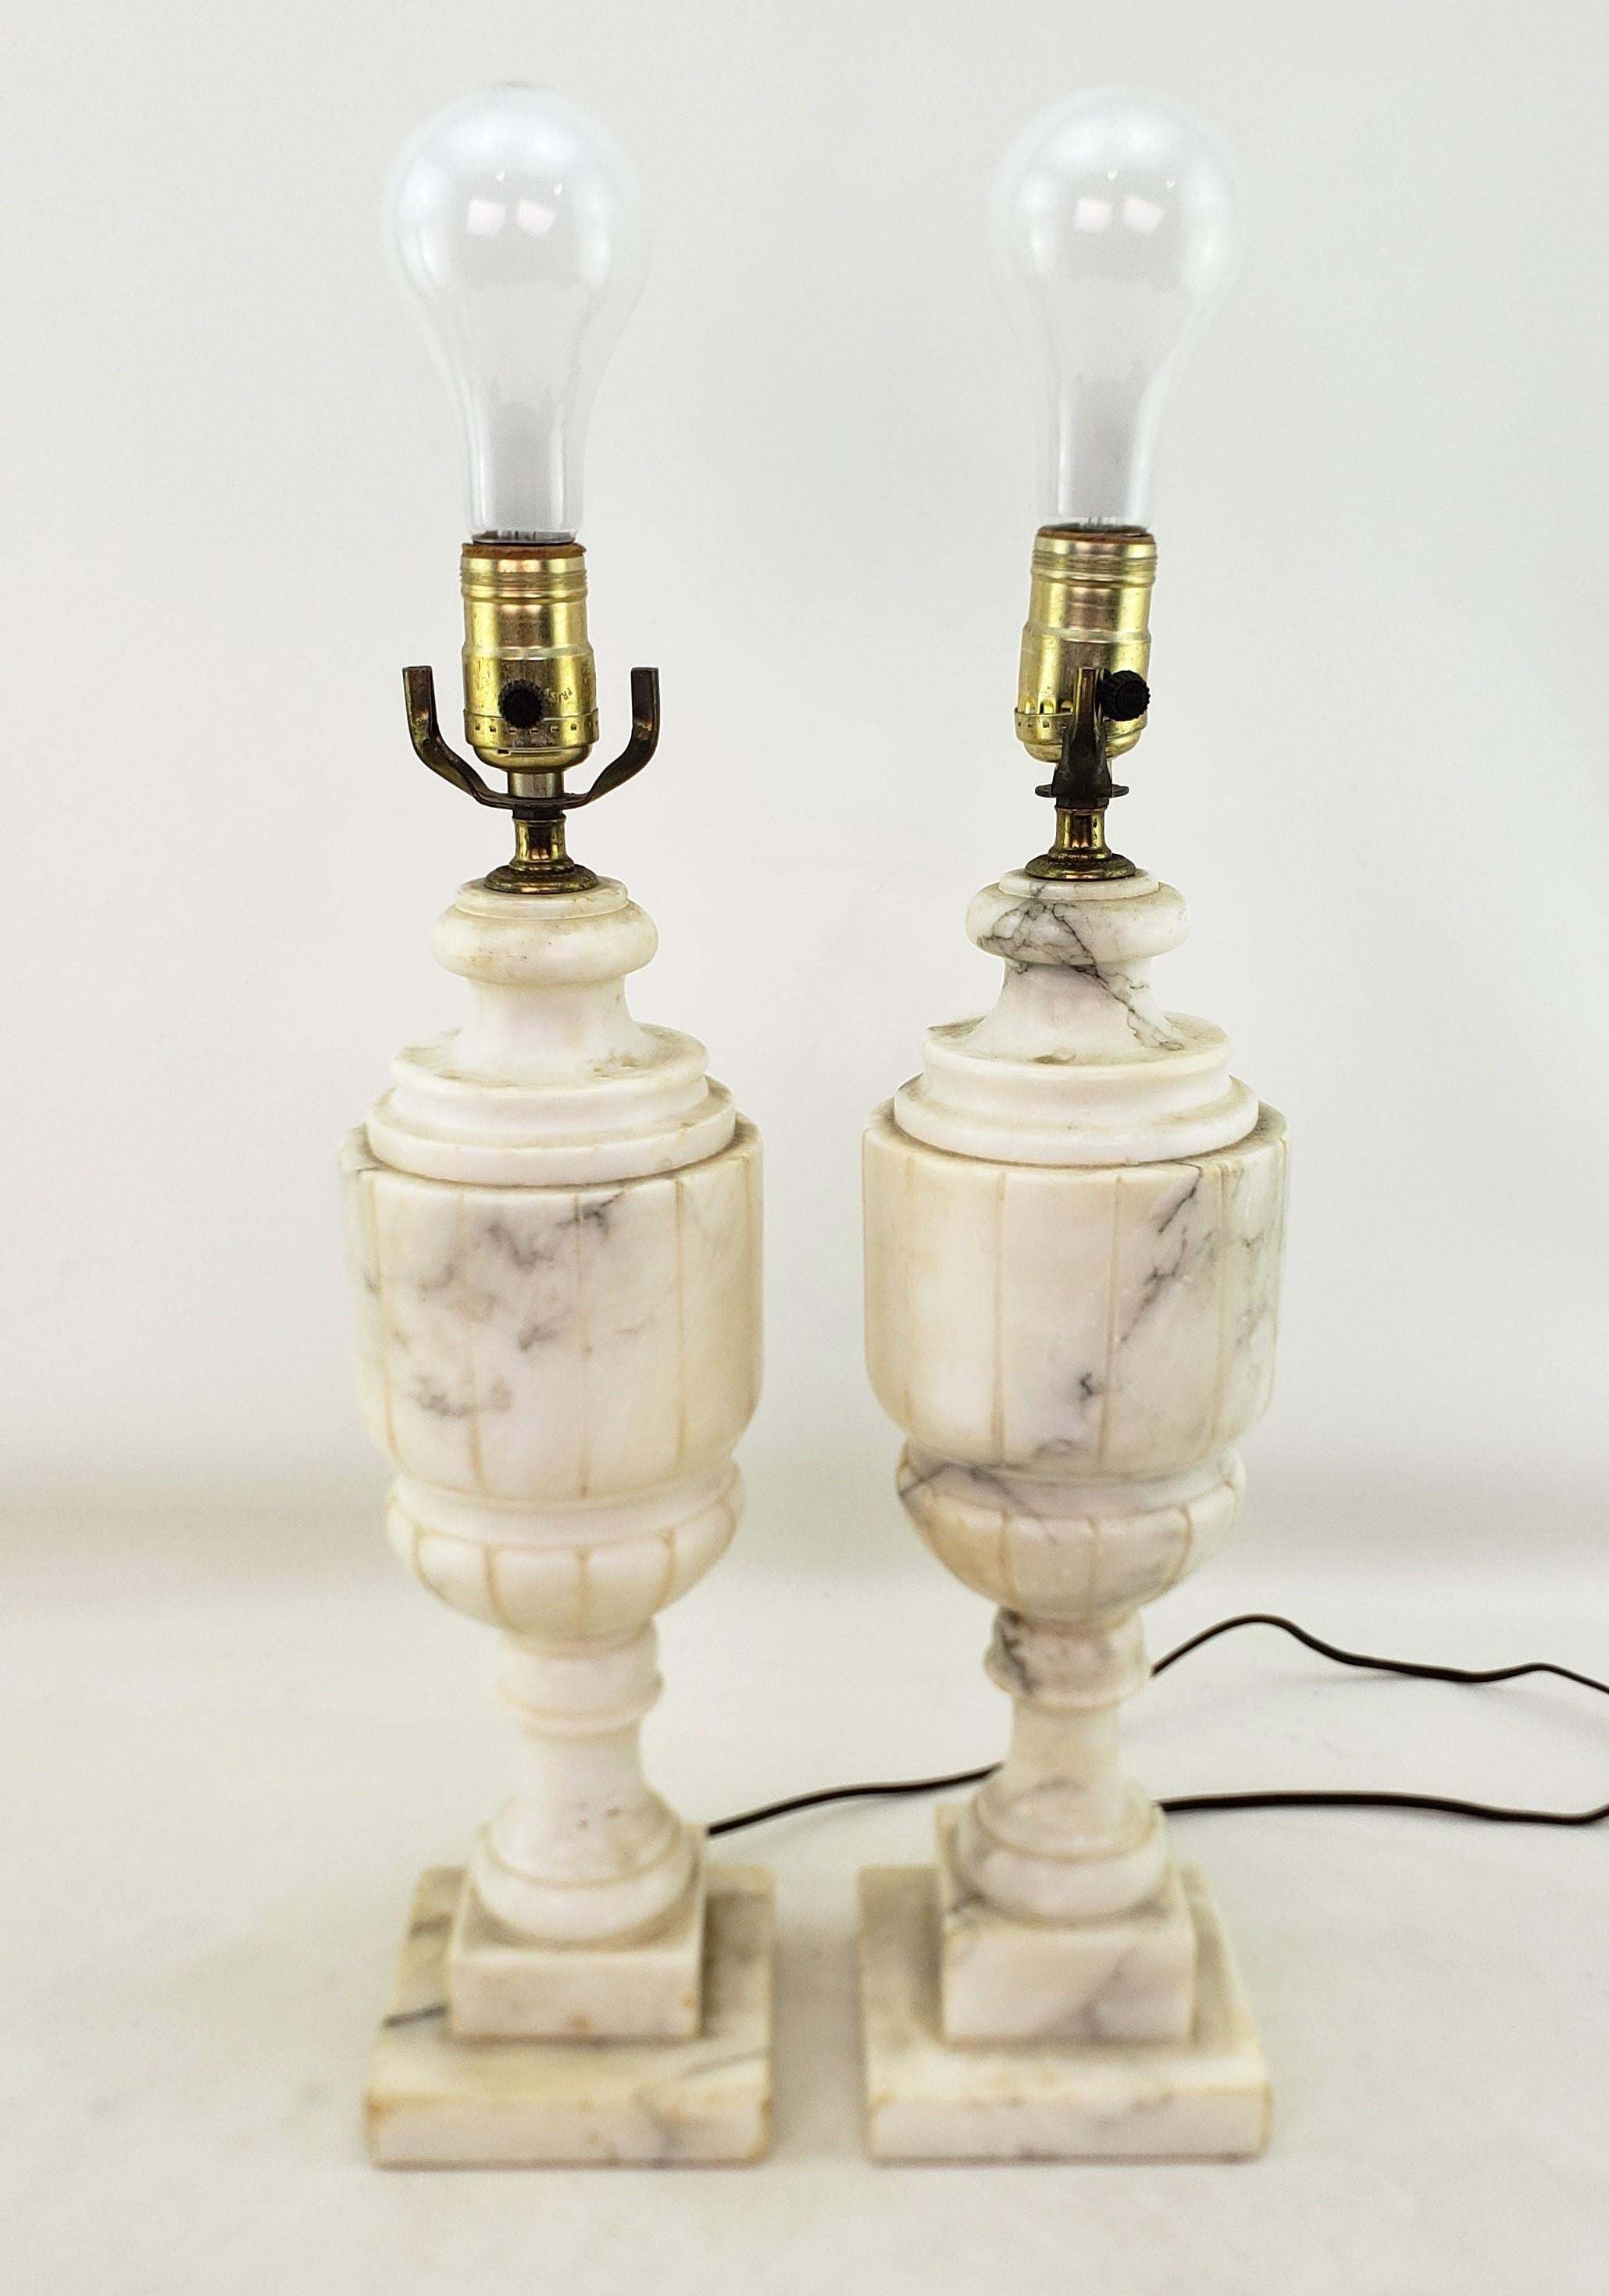 This pair of antique lamp bases are unsigned, but presumed to have originated from Italy and date to approximately 1920 and done in a Neoclassical Revival style. The lamps are composed of veined alabaster with a ribbed urn form and alabaster block